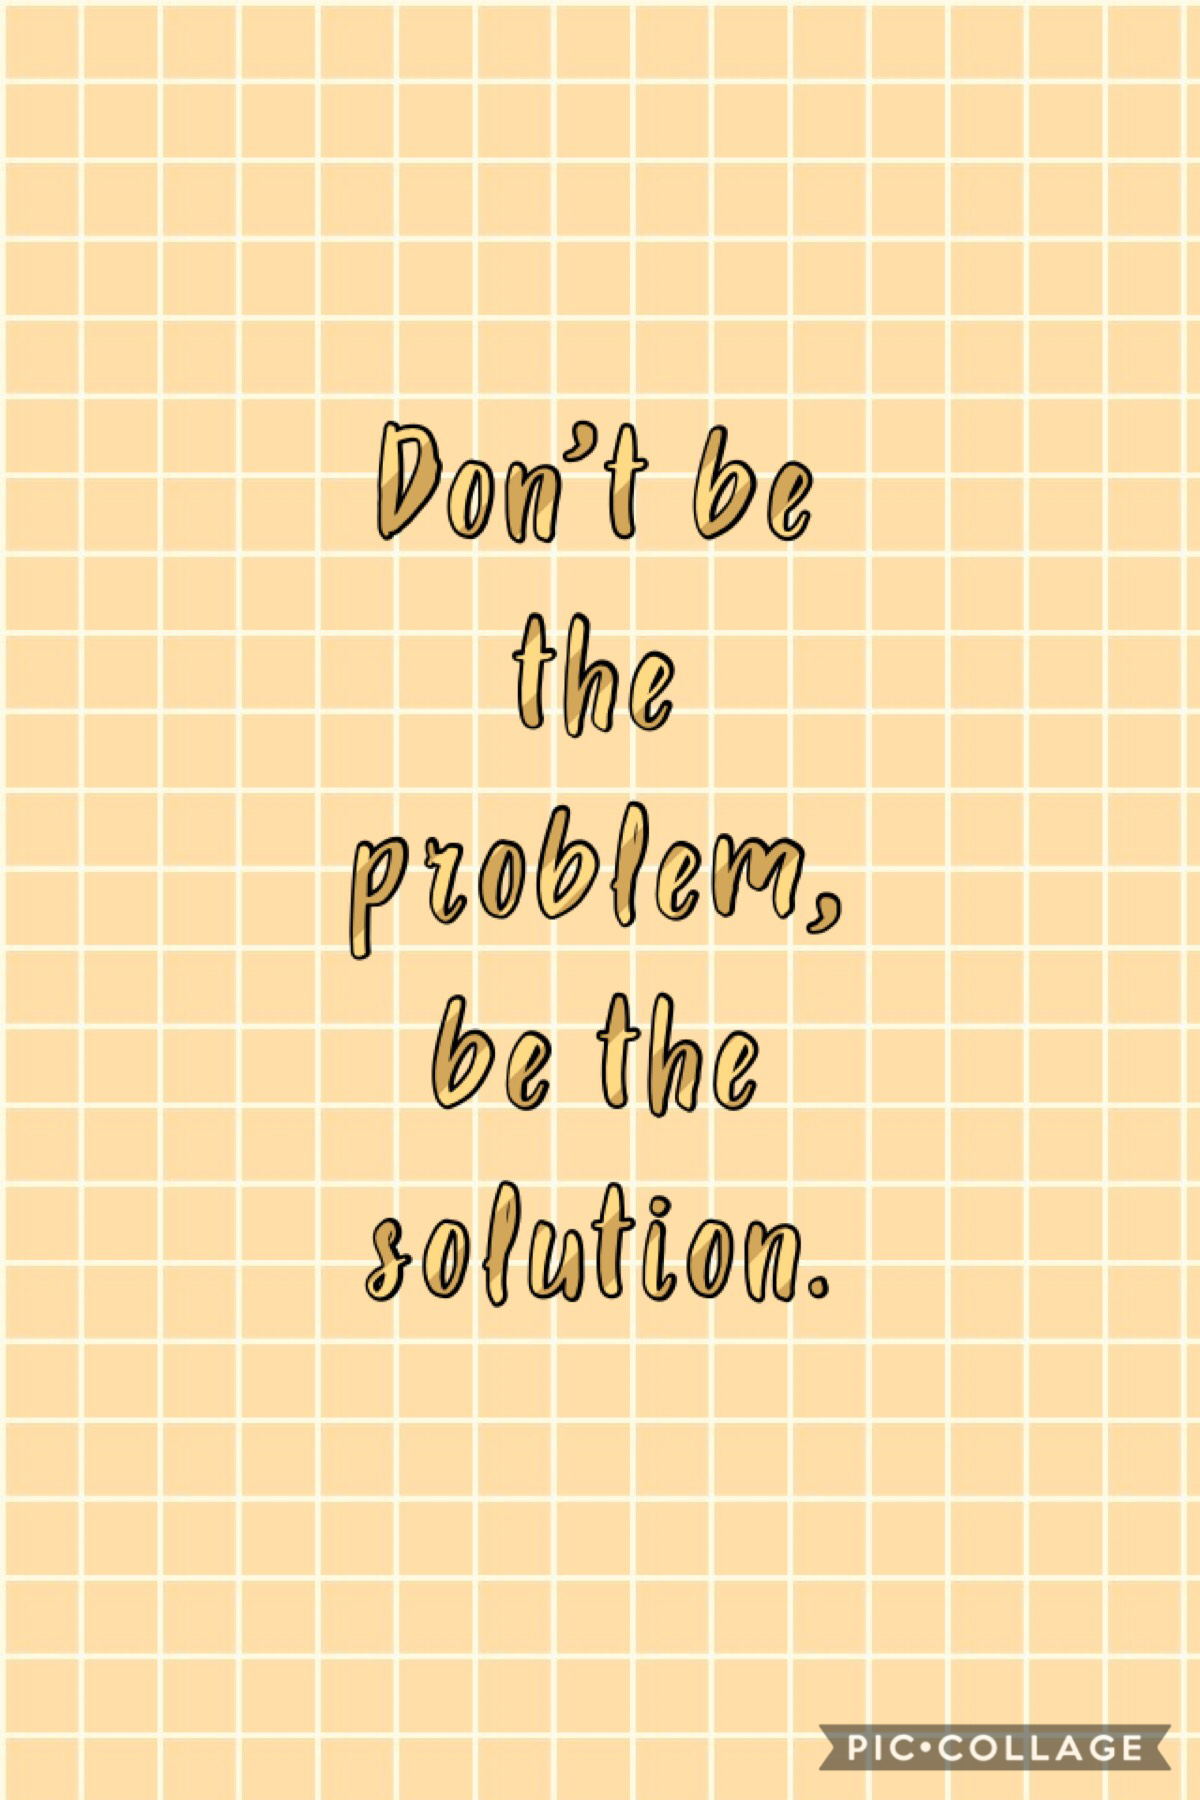 Be the solution.